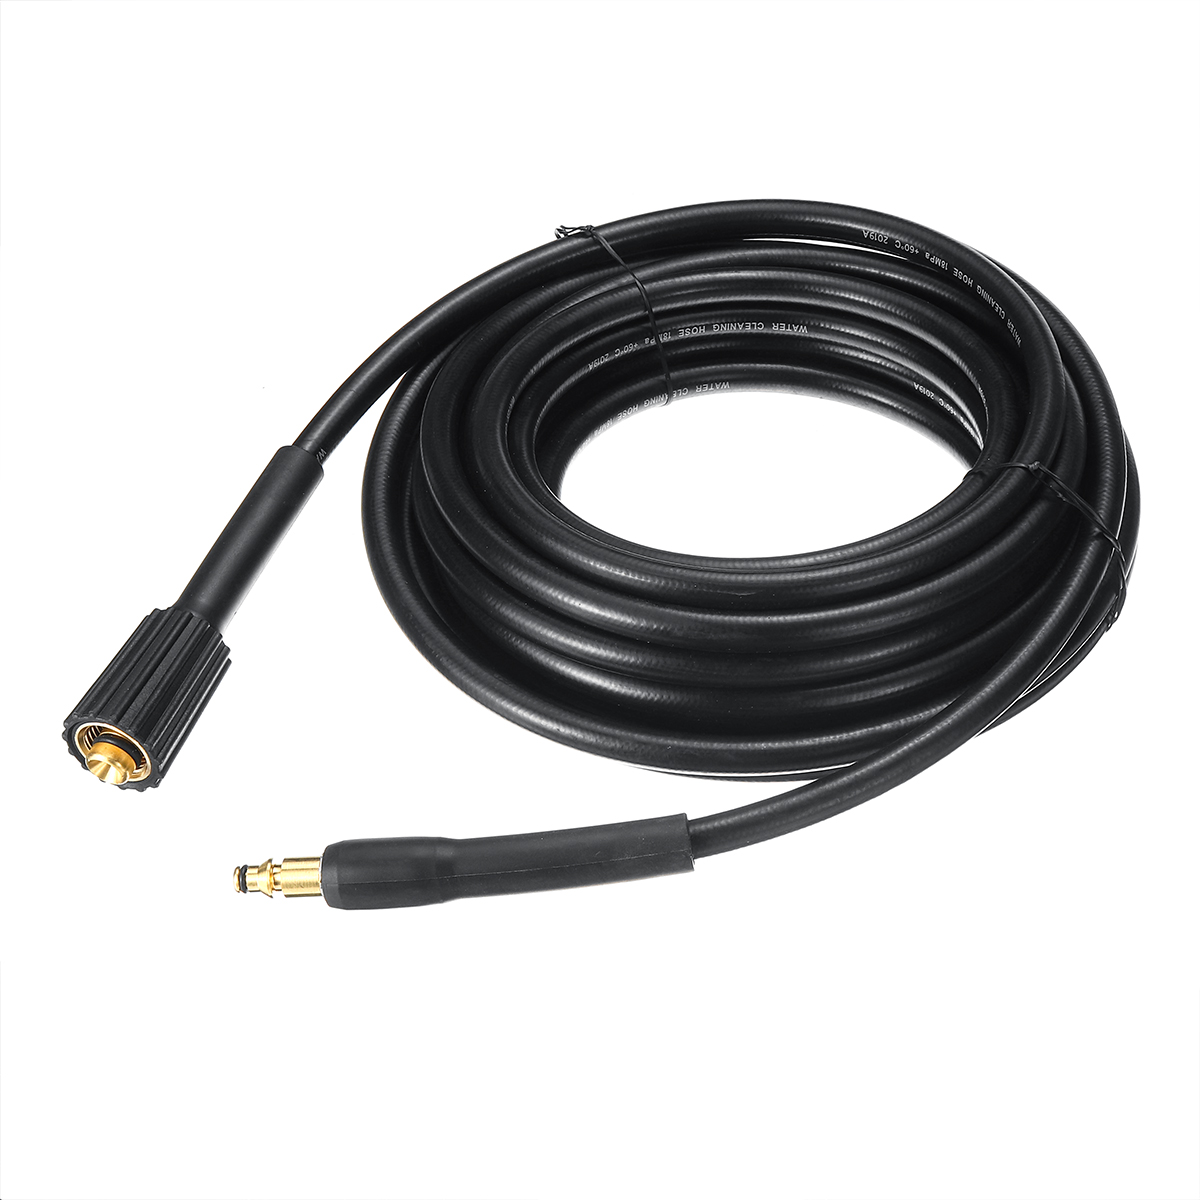 10-Meters-High-Pressure-Washer-Hose-Car-Washer-Water-Cleaning-Extension-Hose-For-Nilfisk-C100-C110-C-1563247-2